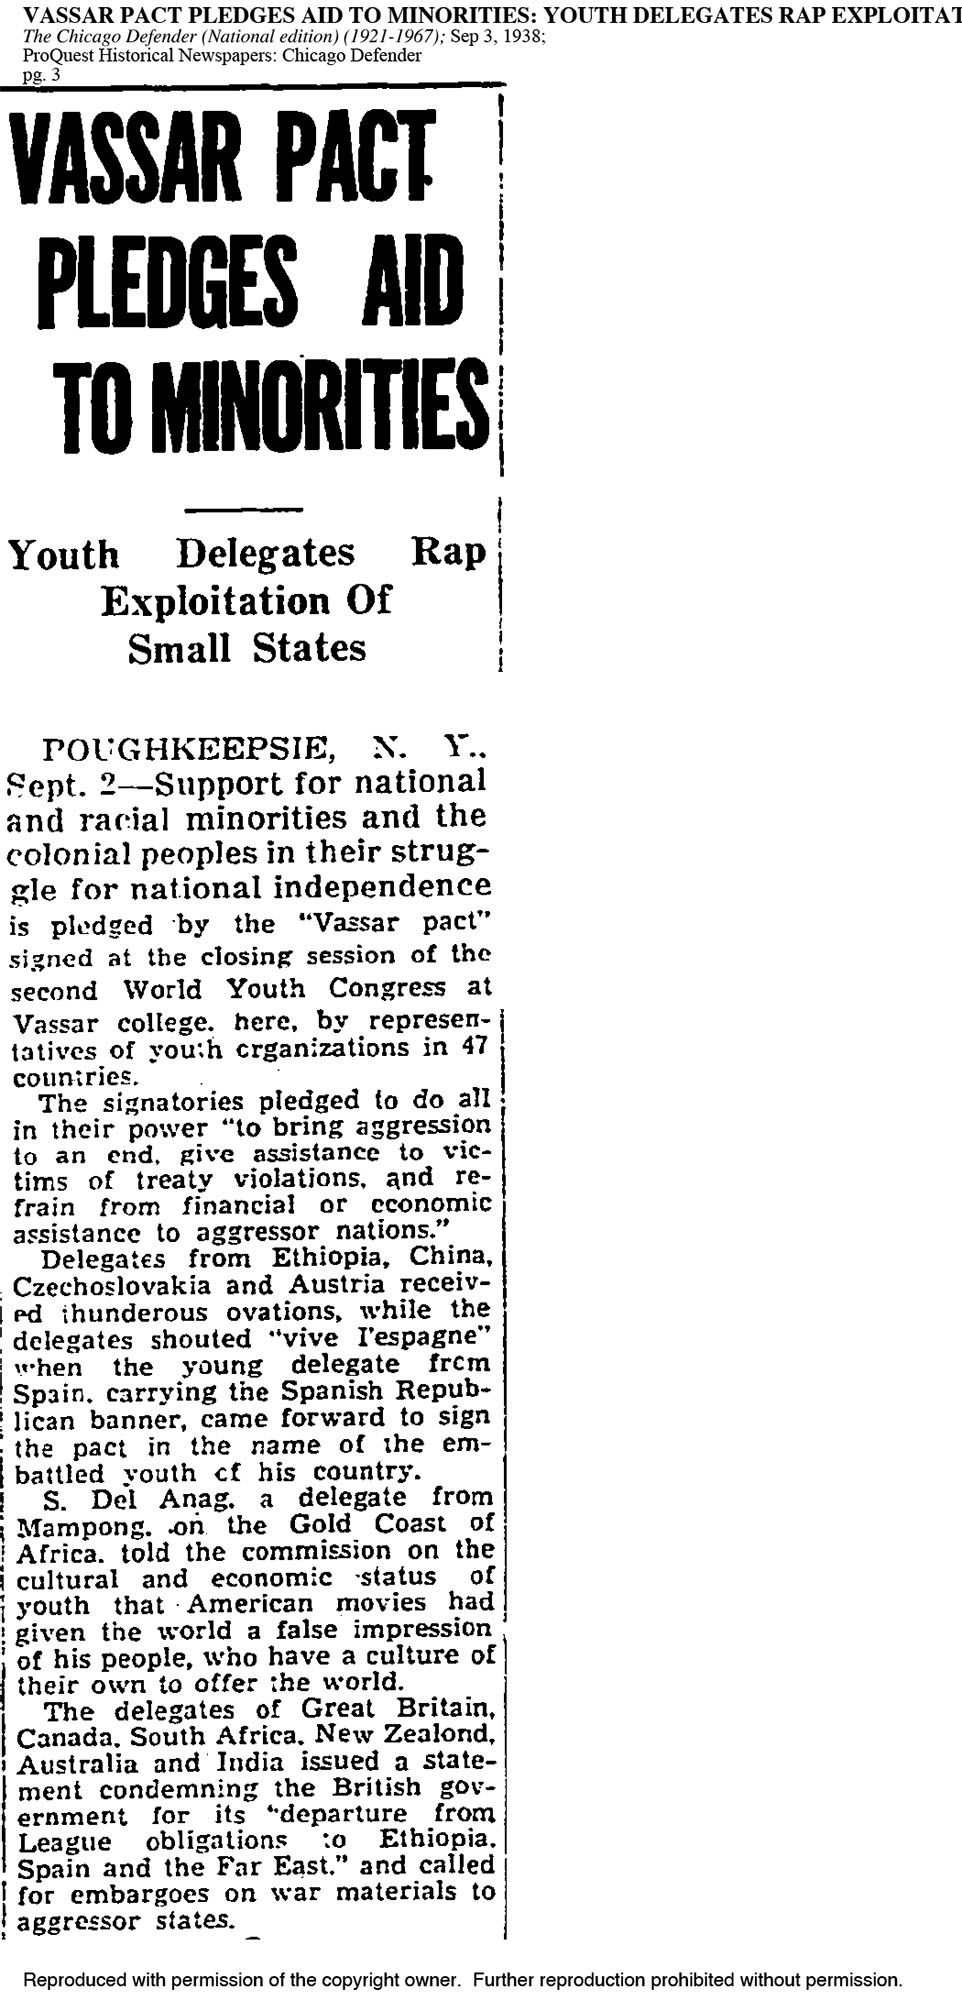 Original article scan for Vassar Pact Pledges Aid to Minorities: Youth Delegates Rap Exploitation of Small States; The Chicago Defender (National edition) (1921-1967); Sep 3, 1938; ProQuest Historical Newspapers: Chicago Defender pg. 3